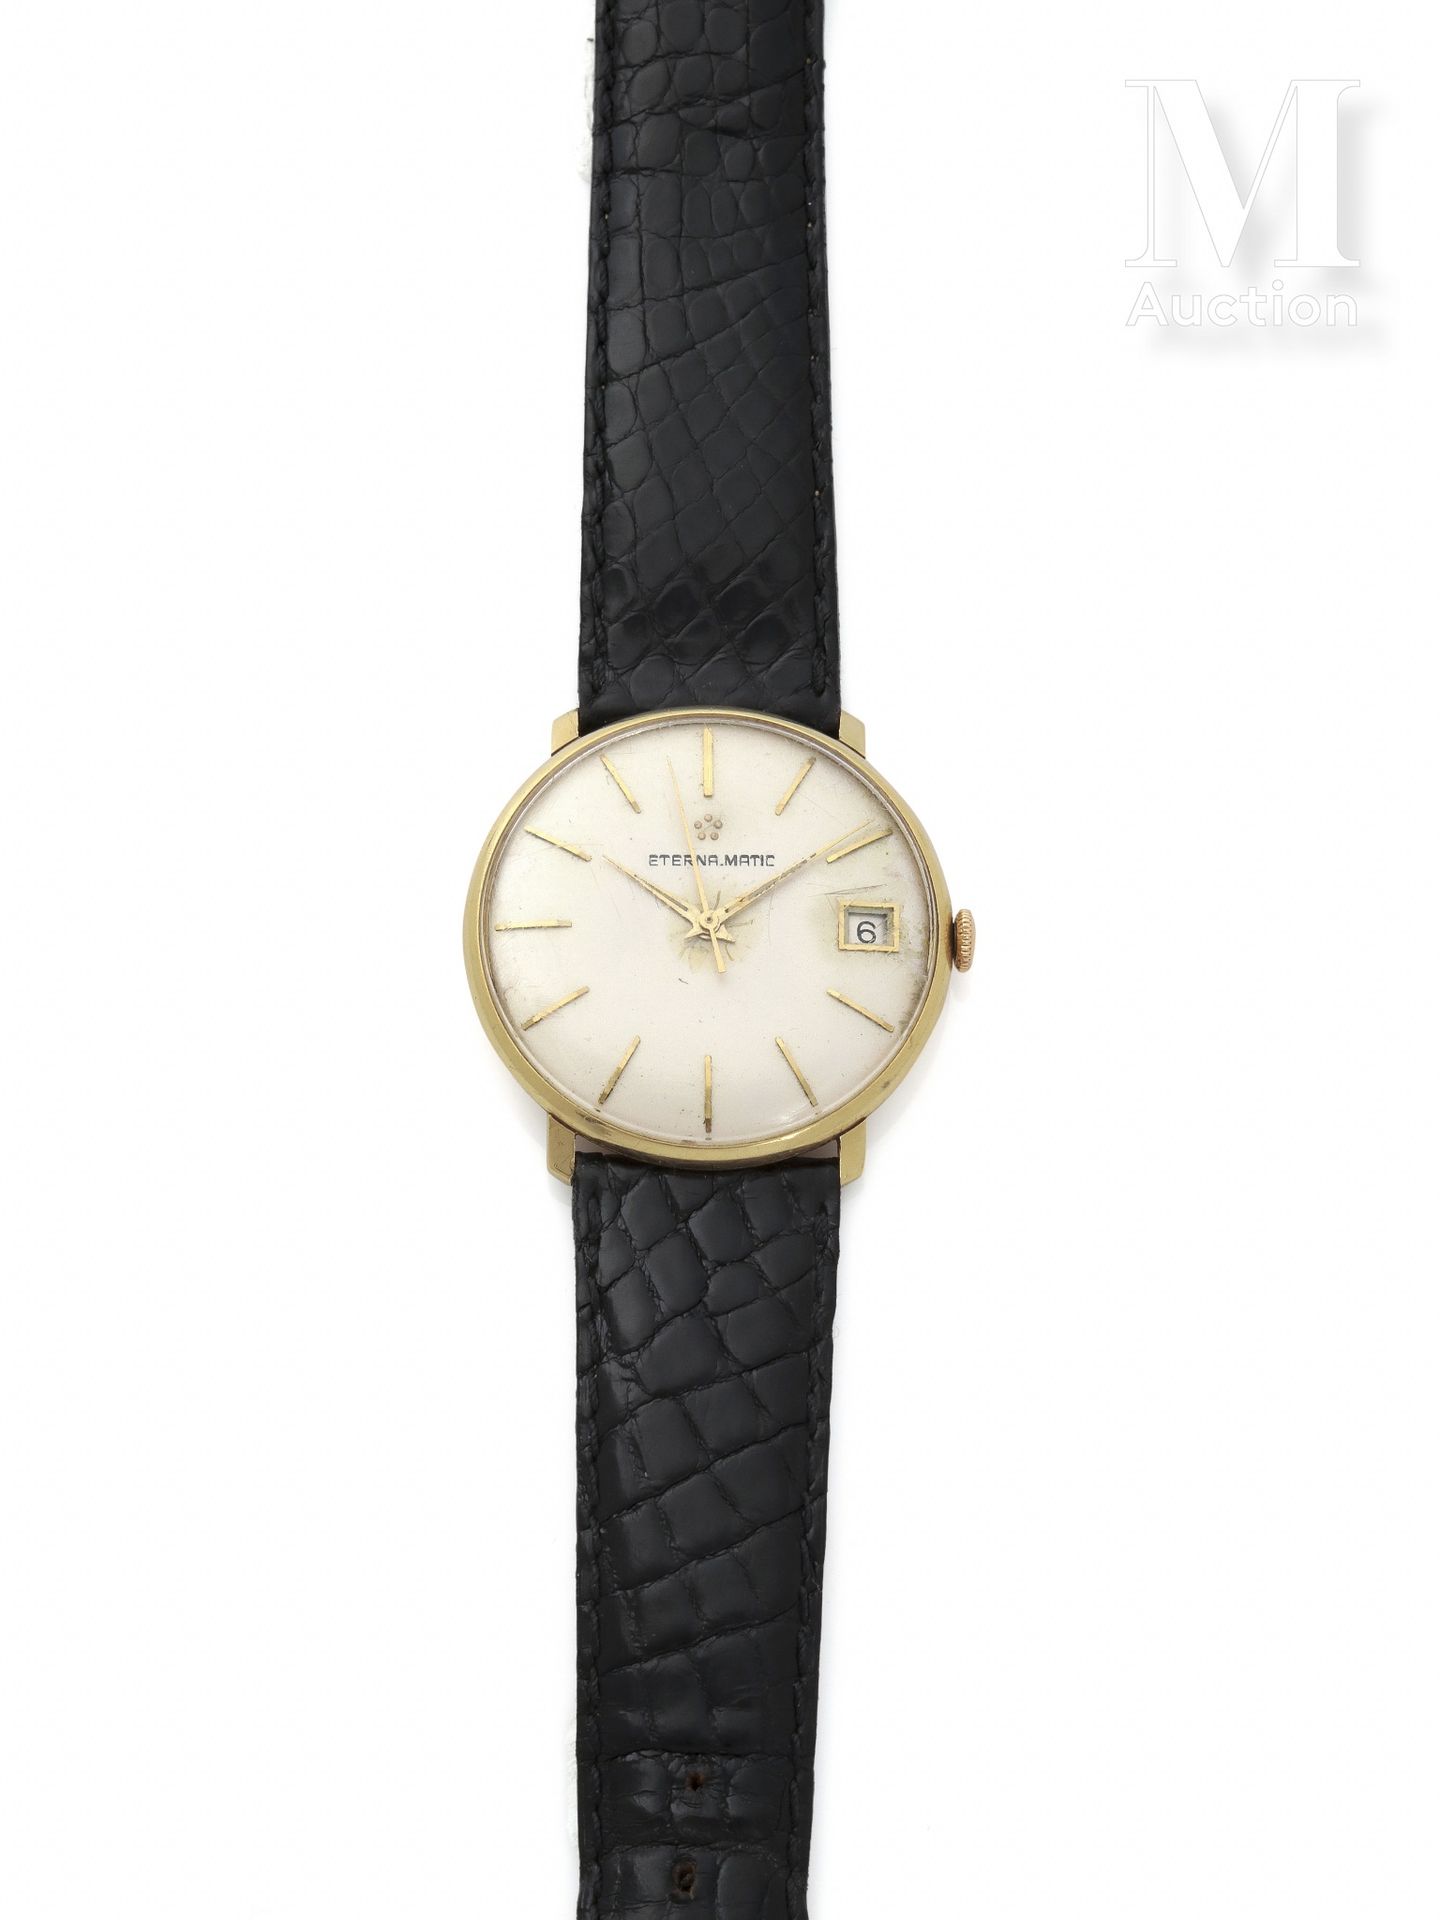 ETERNA-MATIC Circa 1960

Men's round watch in 18k gold.

Cream dial with applied&hellip;